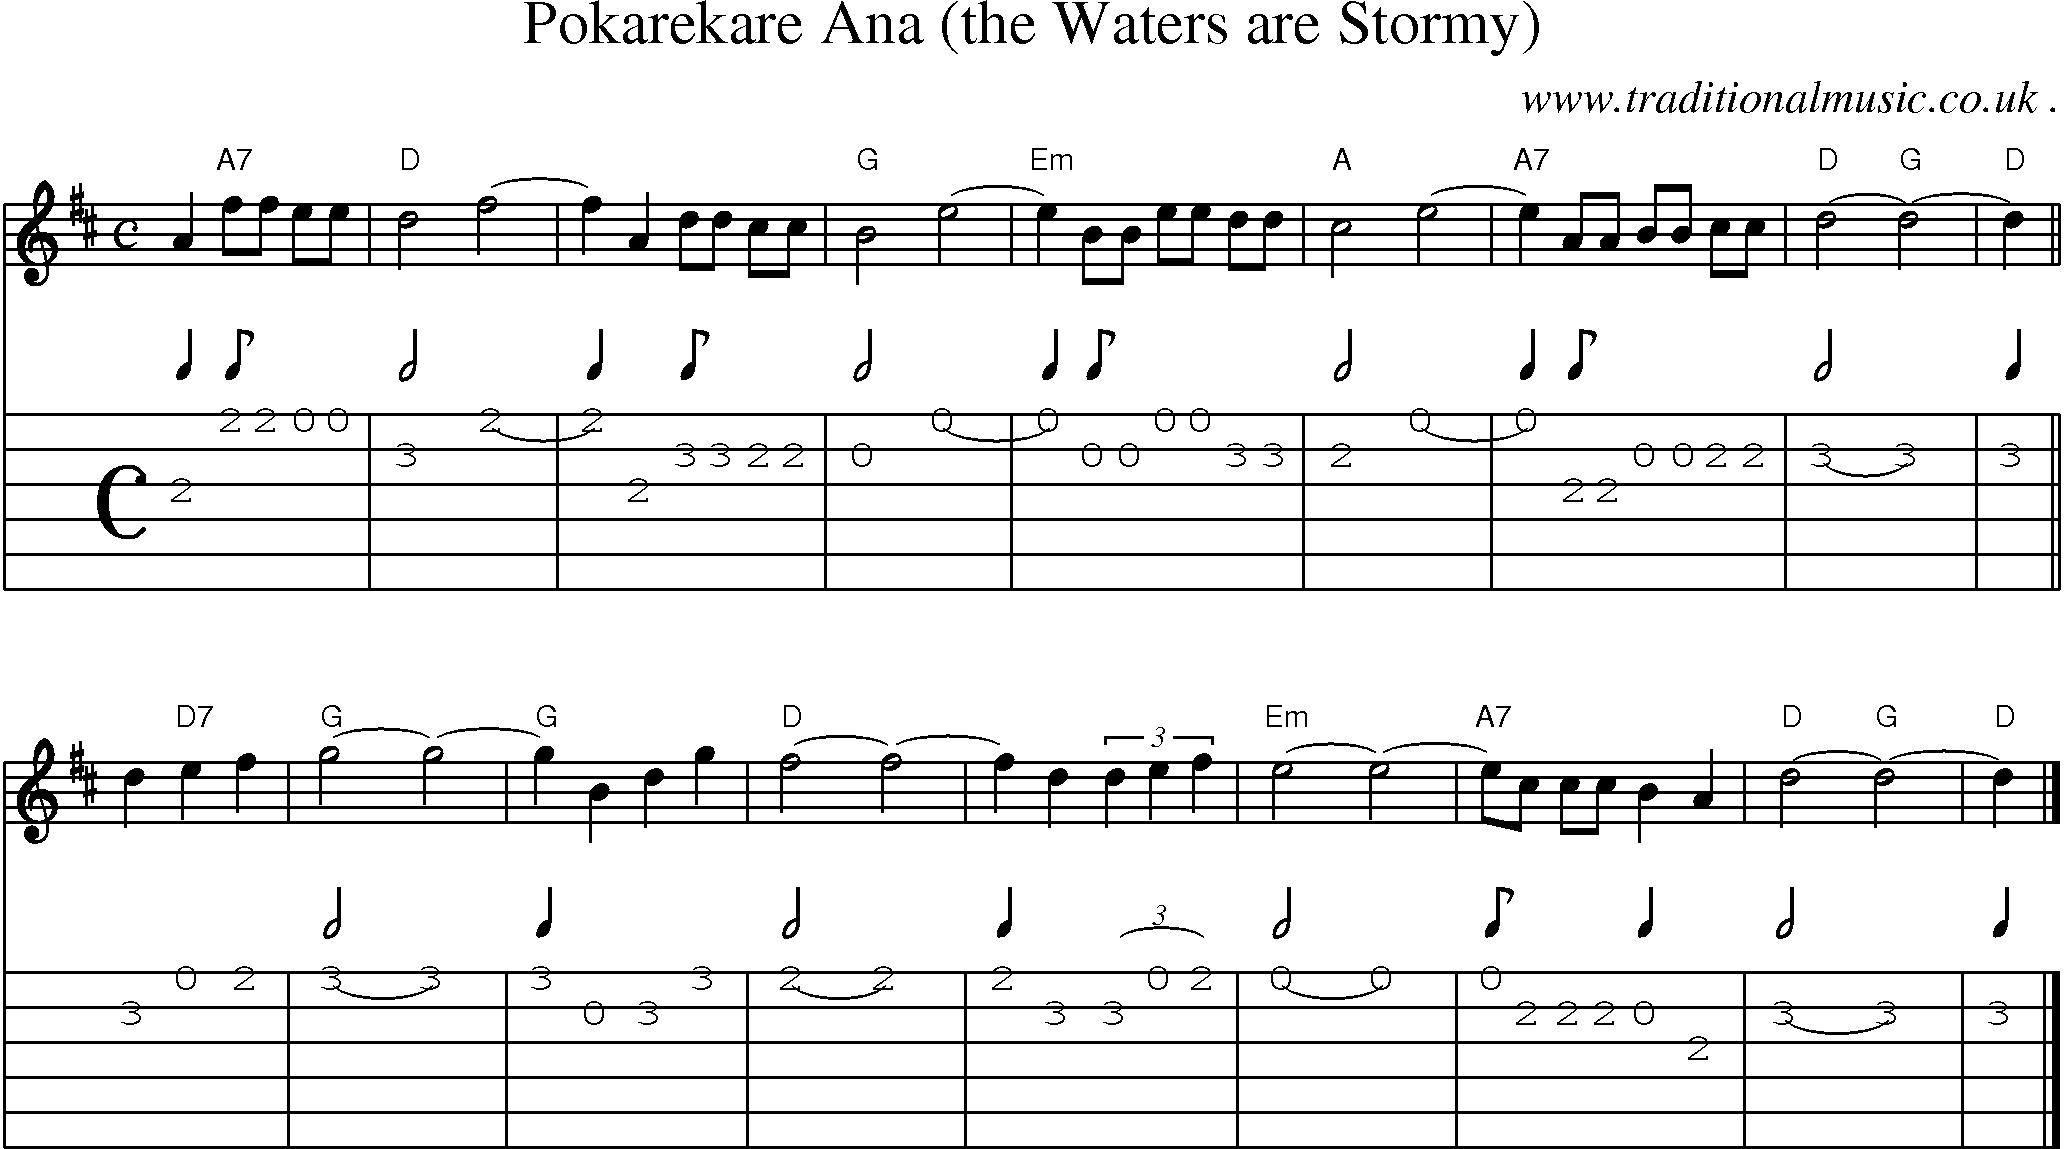 Sheet-music  score, Chords and Guitar Tabs for Pokarekare Ana The Waters Are Stormy